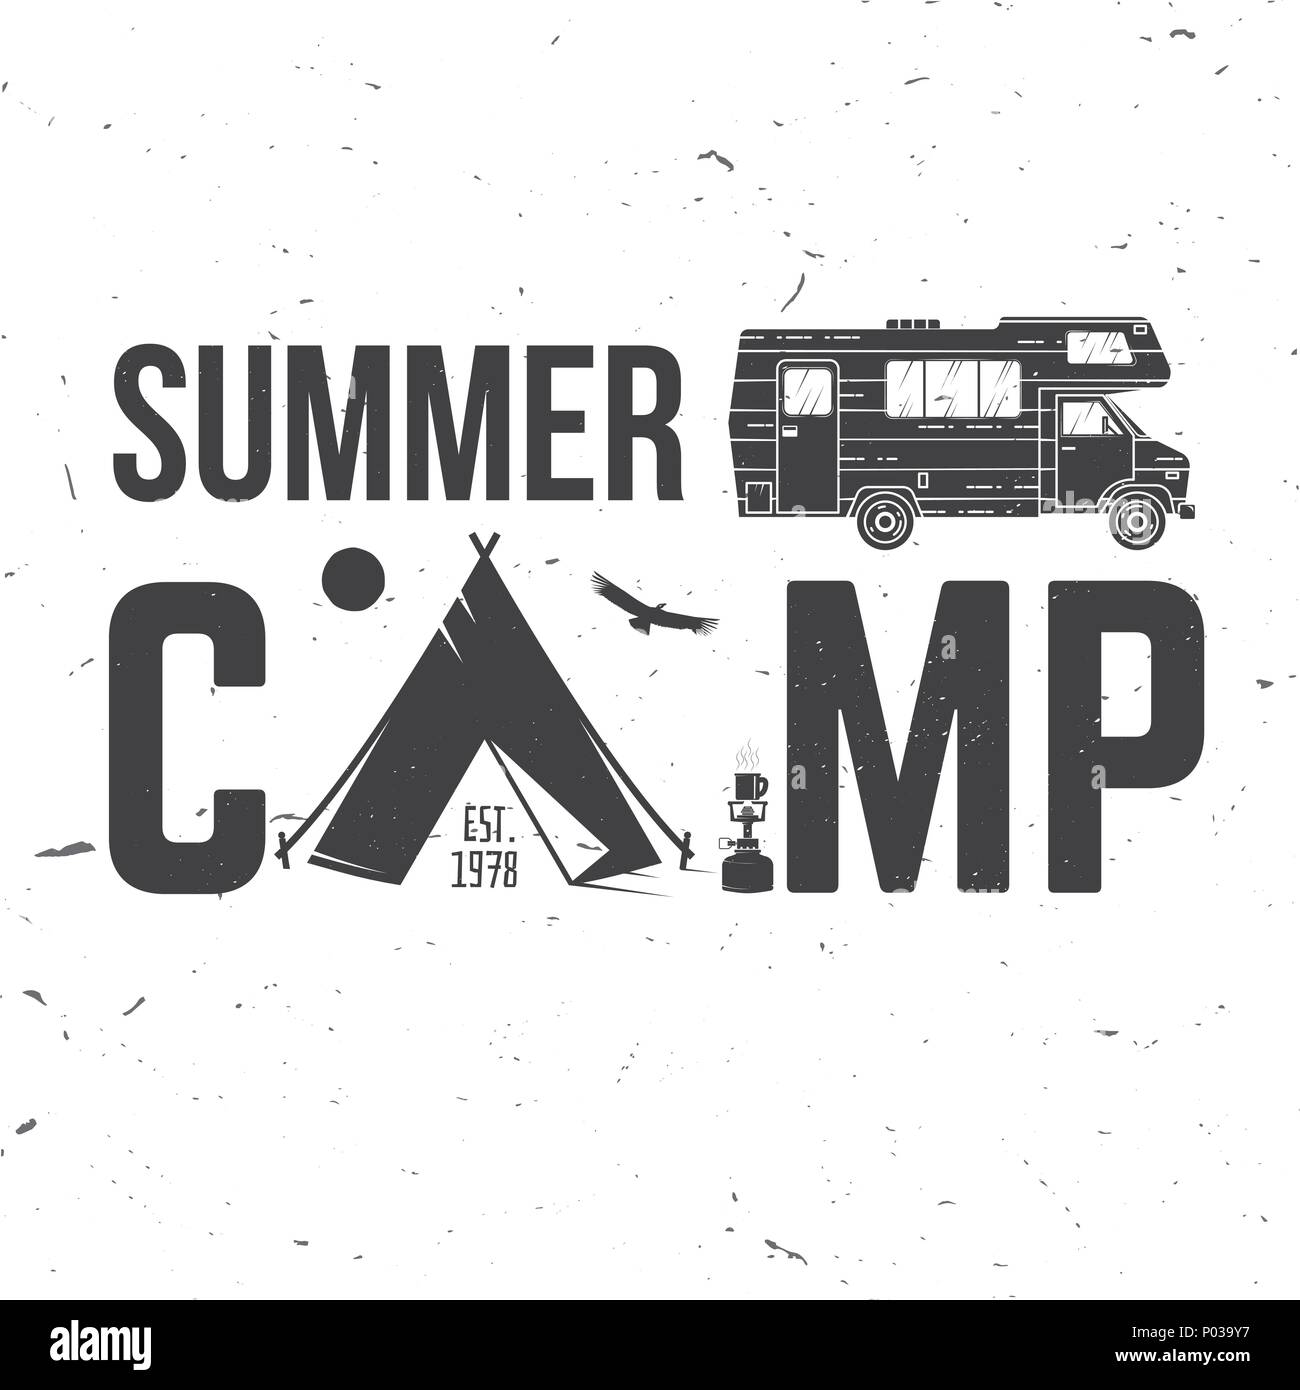 Summer camp. Vector illustration. Concept for shirt or logo, print, stamp or tee. Vintage typography design with rv trailer, camping tent and forest s Stock Vector